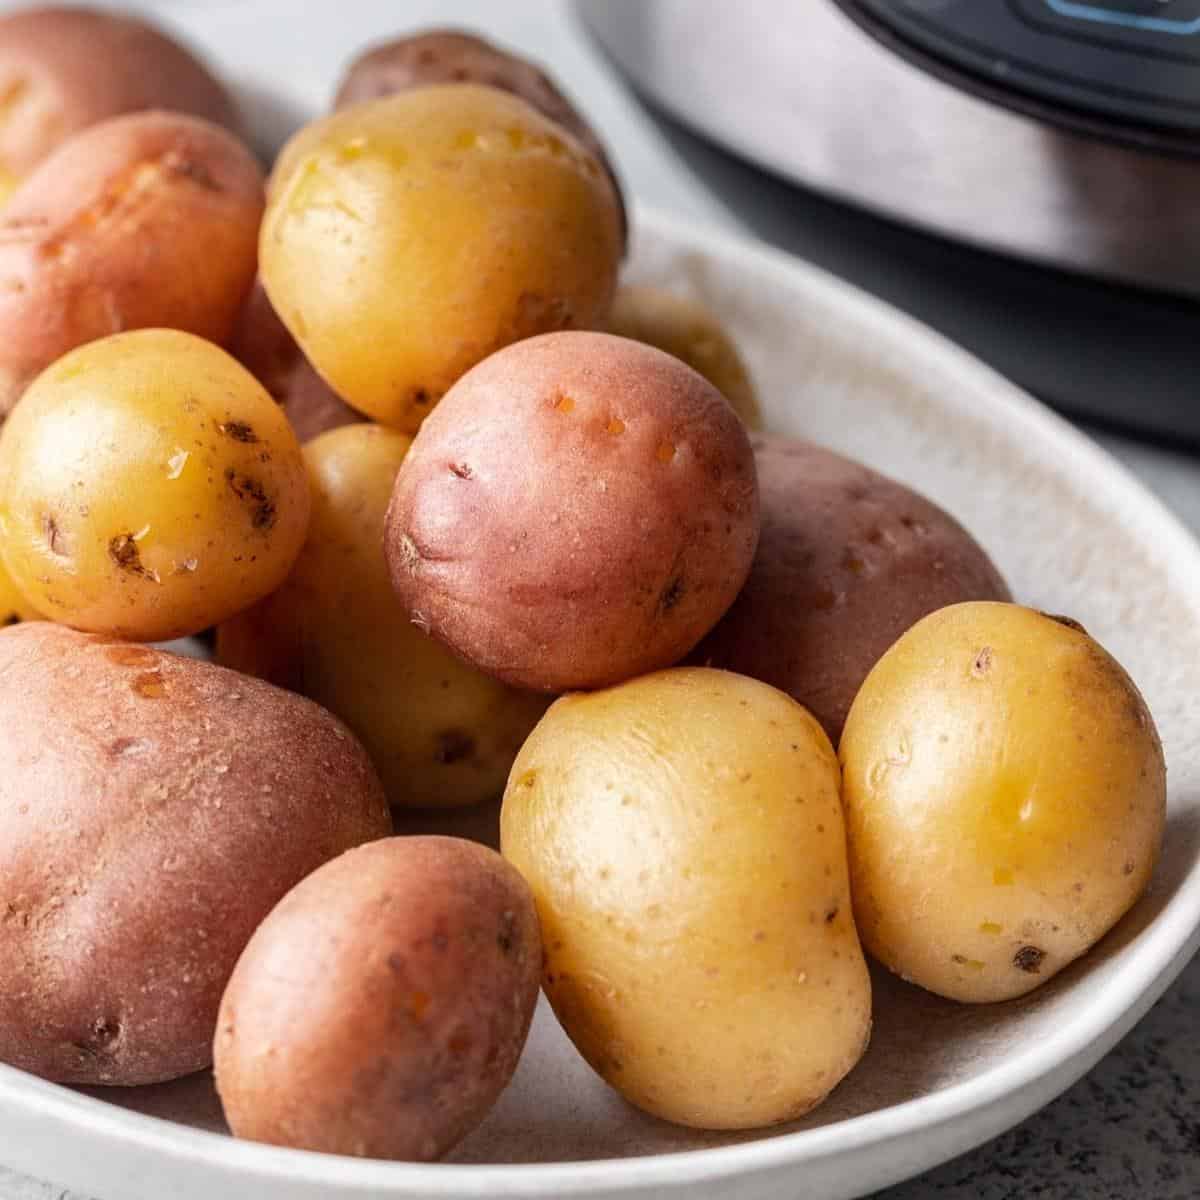 https://www.yourhomemadehealthy.com/wp-content/uploads/2022/11/Featured-Instant-Pot-Boiled-Potatoes.jpg